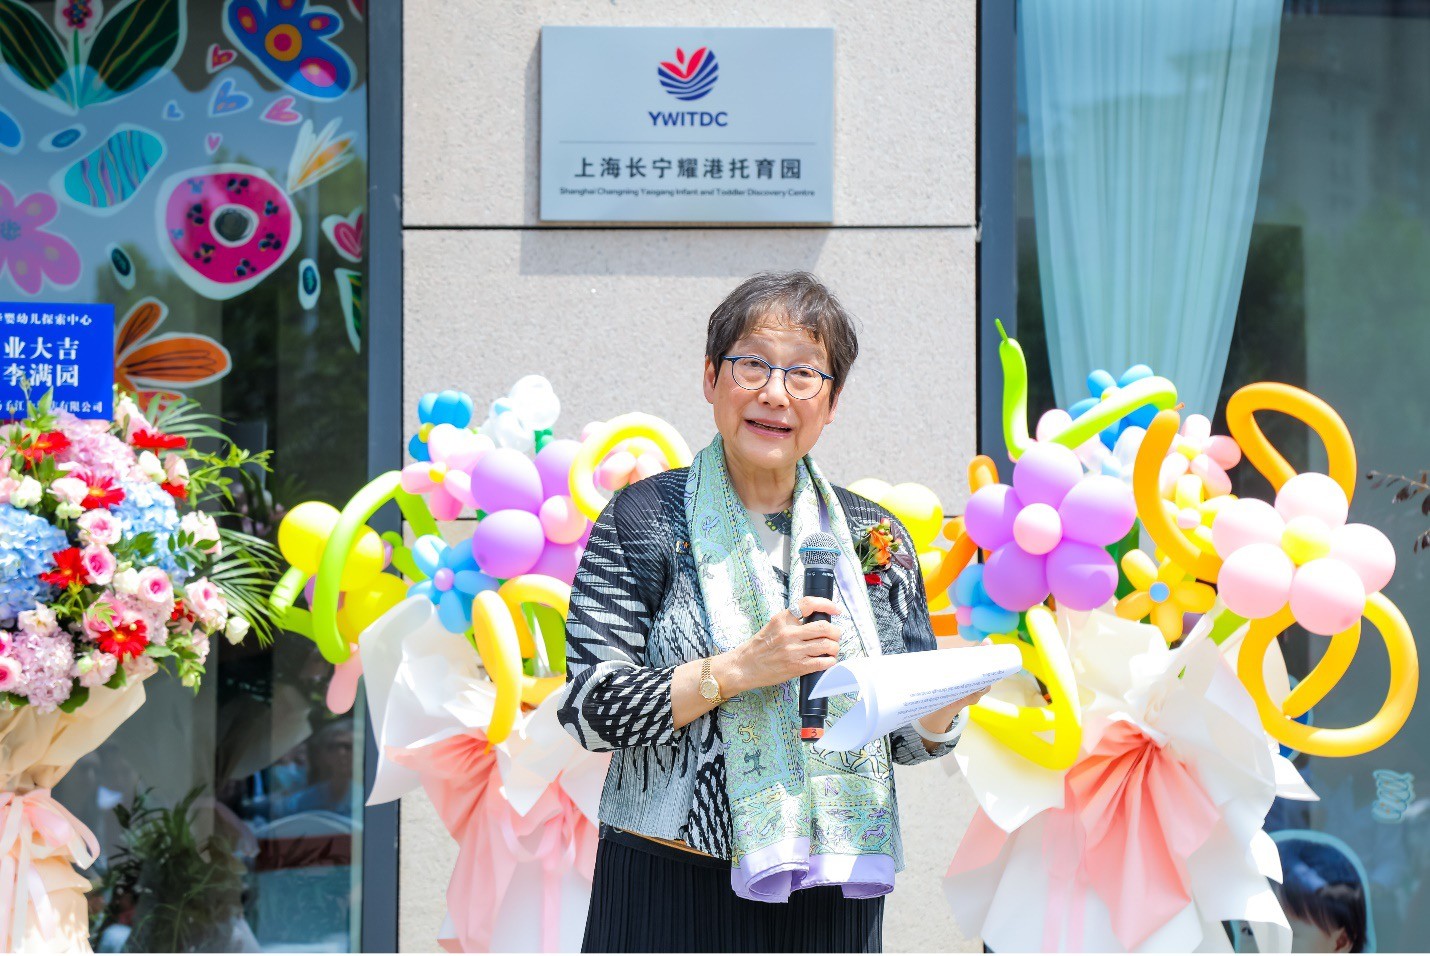 Dr Betty Chan, CEO & School Supervisor of Yew Chung Yew Wah Education Network delivered an opening speech.